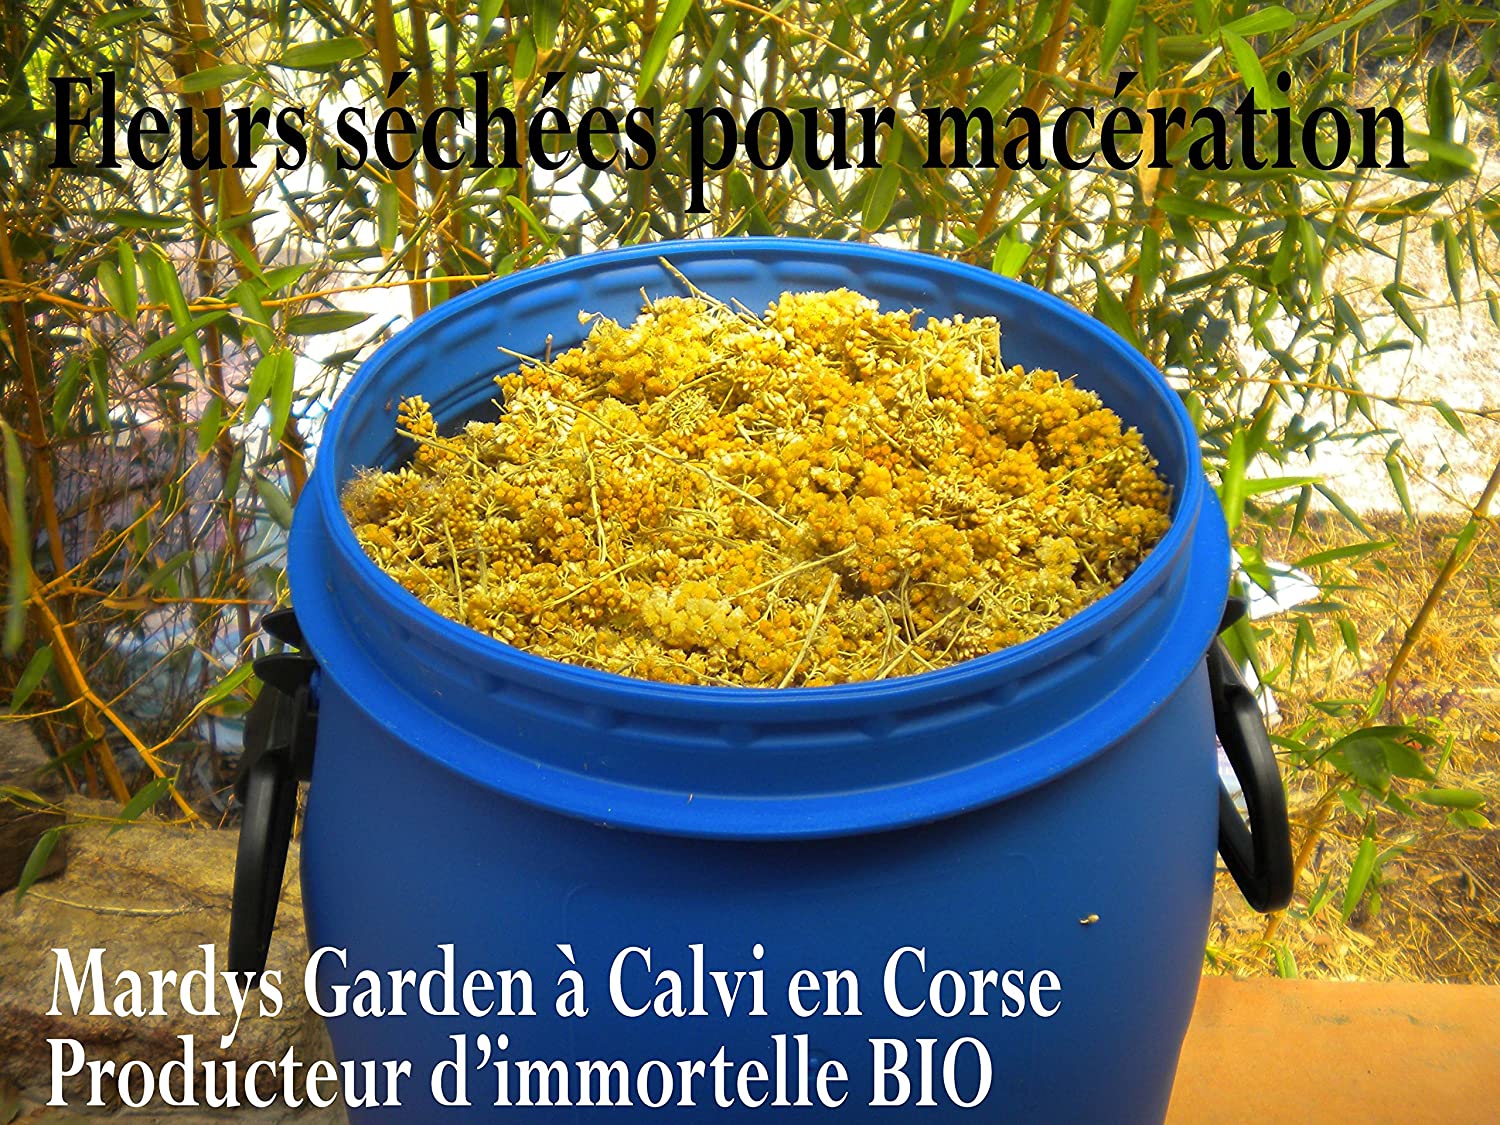 Our flowers are manually harvested when they bloom in June. Right after we macerate them in grapeseed oil. Our maceration process is a modernized version of an ancestral technique of solar maceration. Then we cold press the flowers to extract all the plant propeties in the oil. We enrich our macerate with our own organic Immortelle Essential Oil